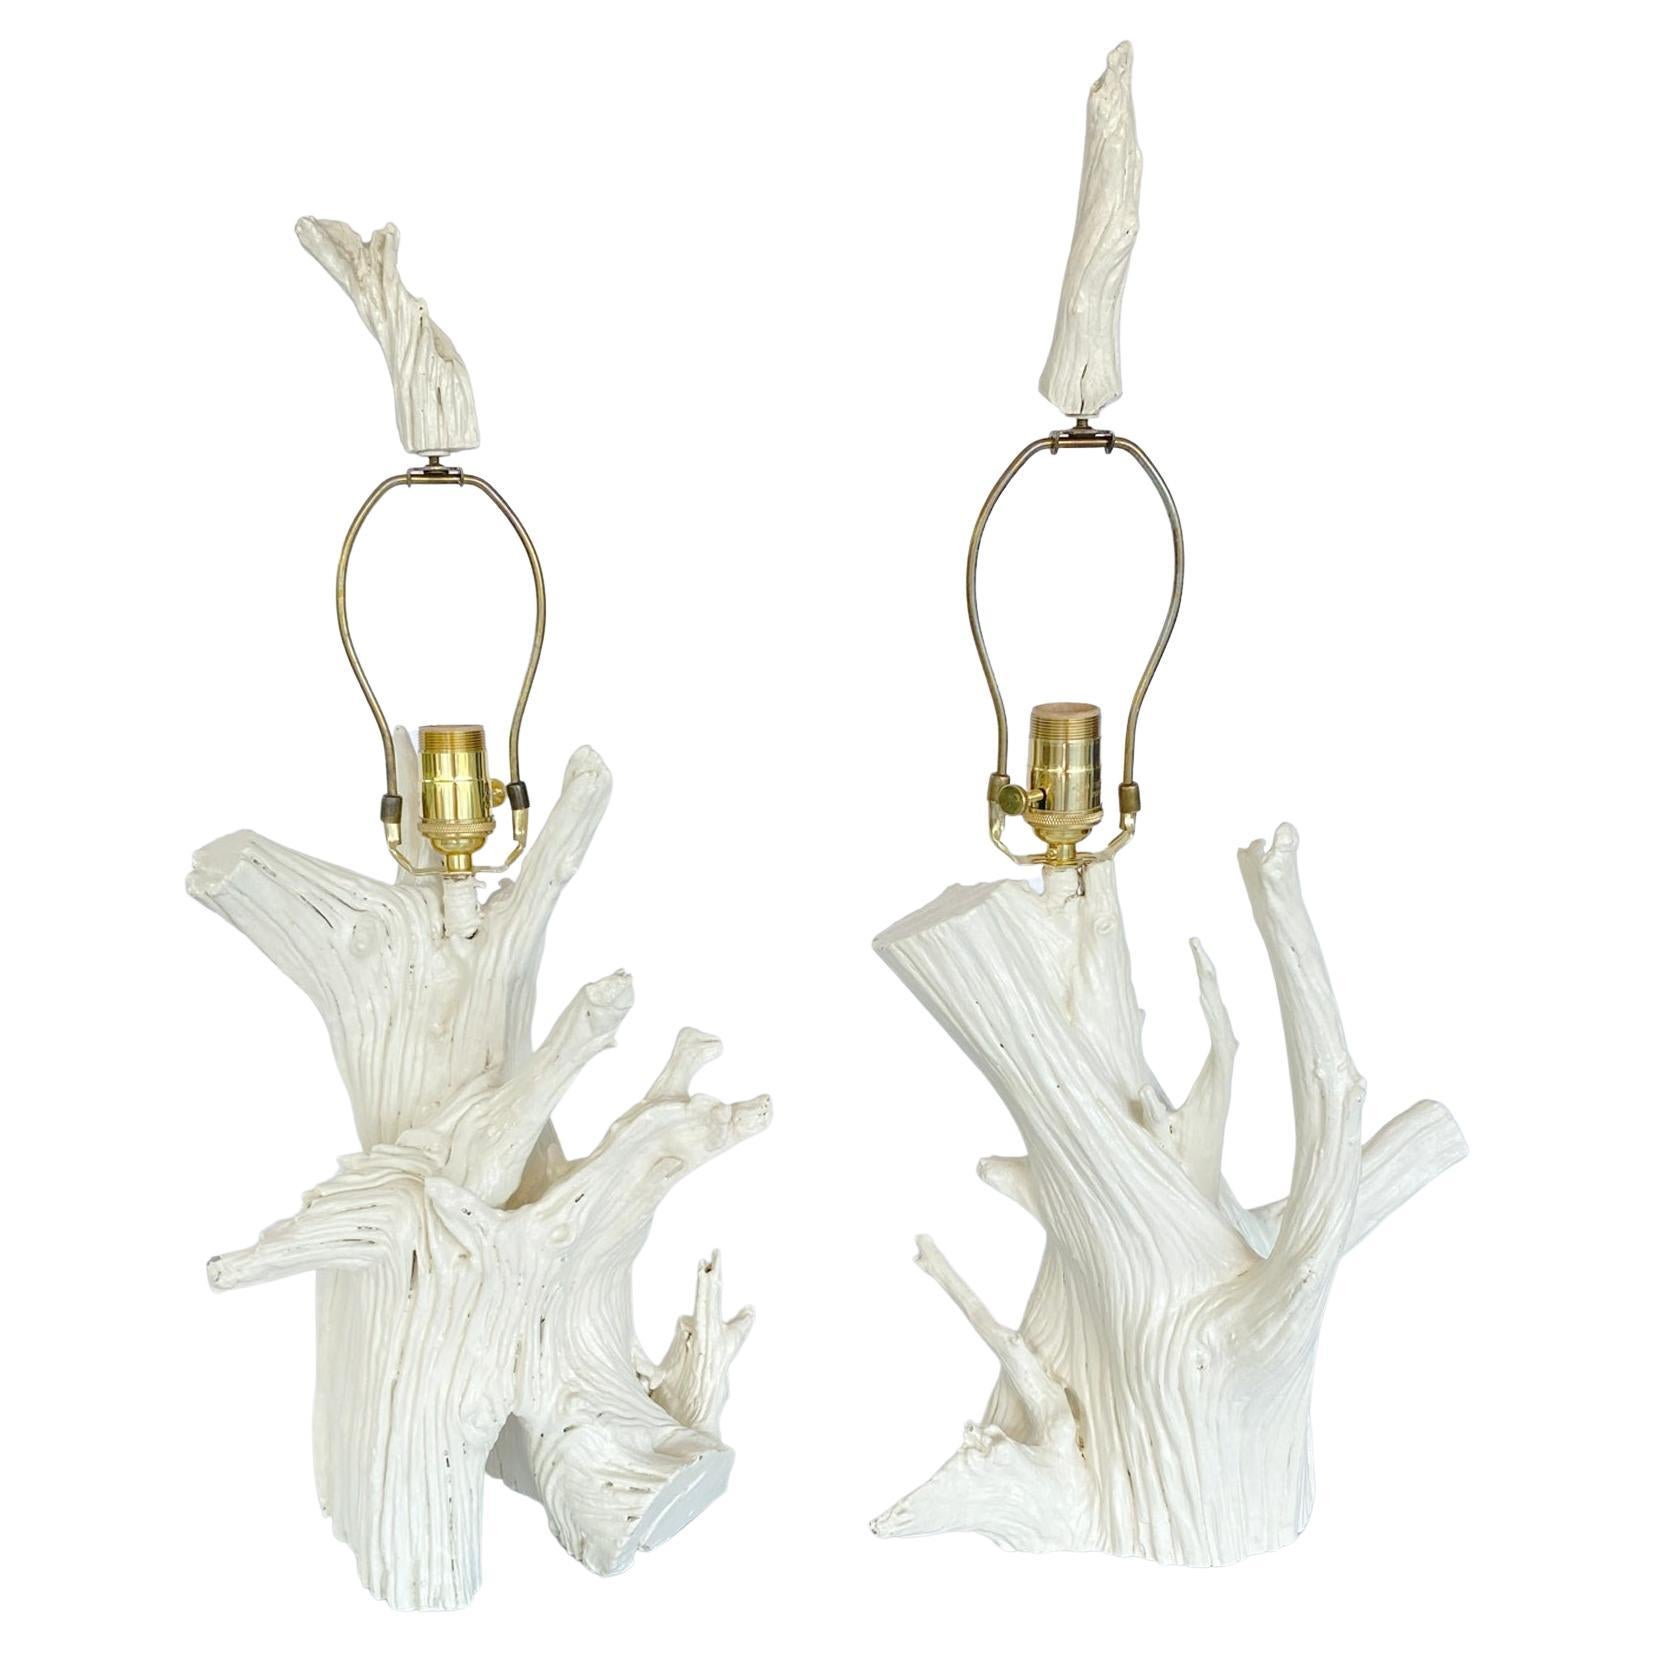 Pair of Painted Wood Root Lamps with Matching Finials